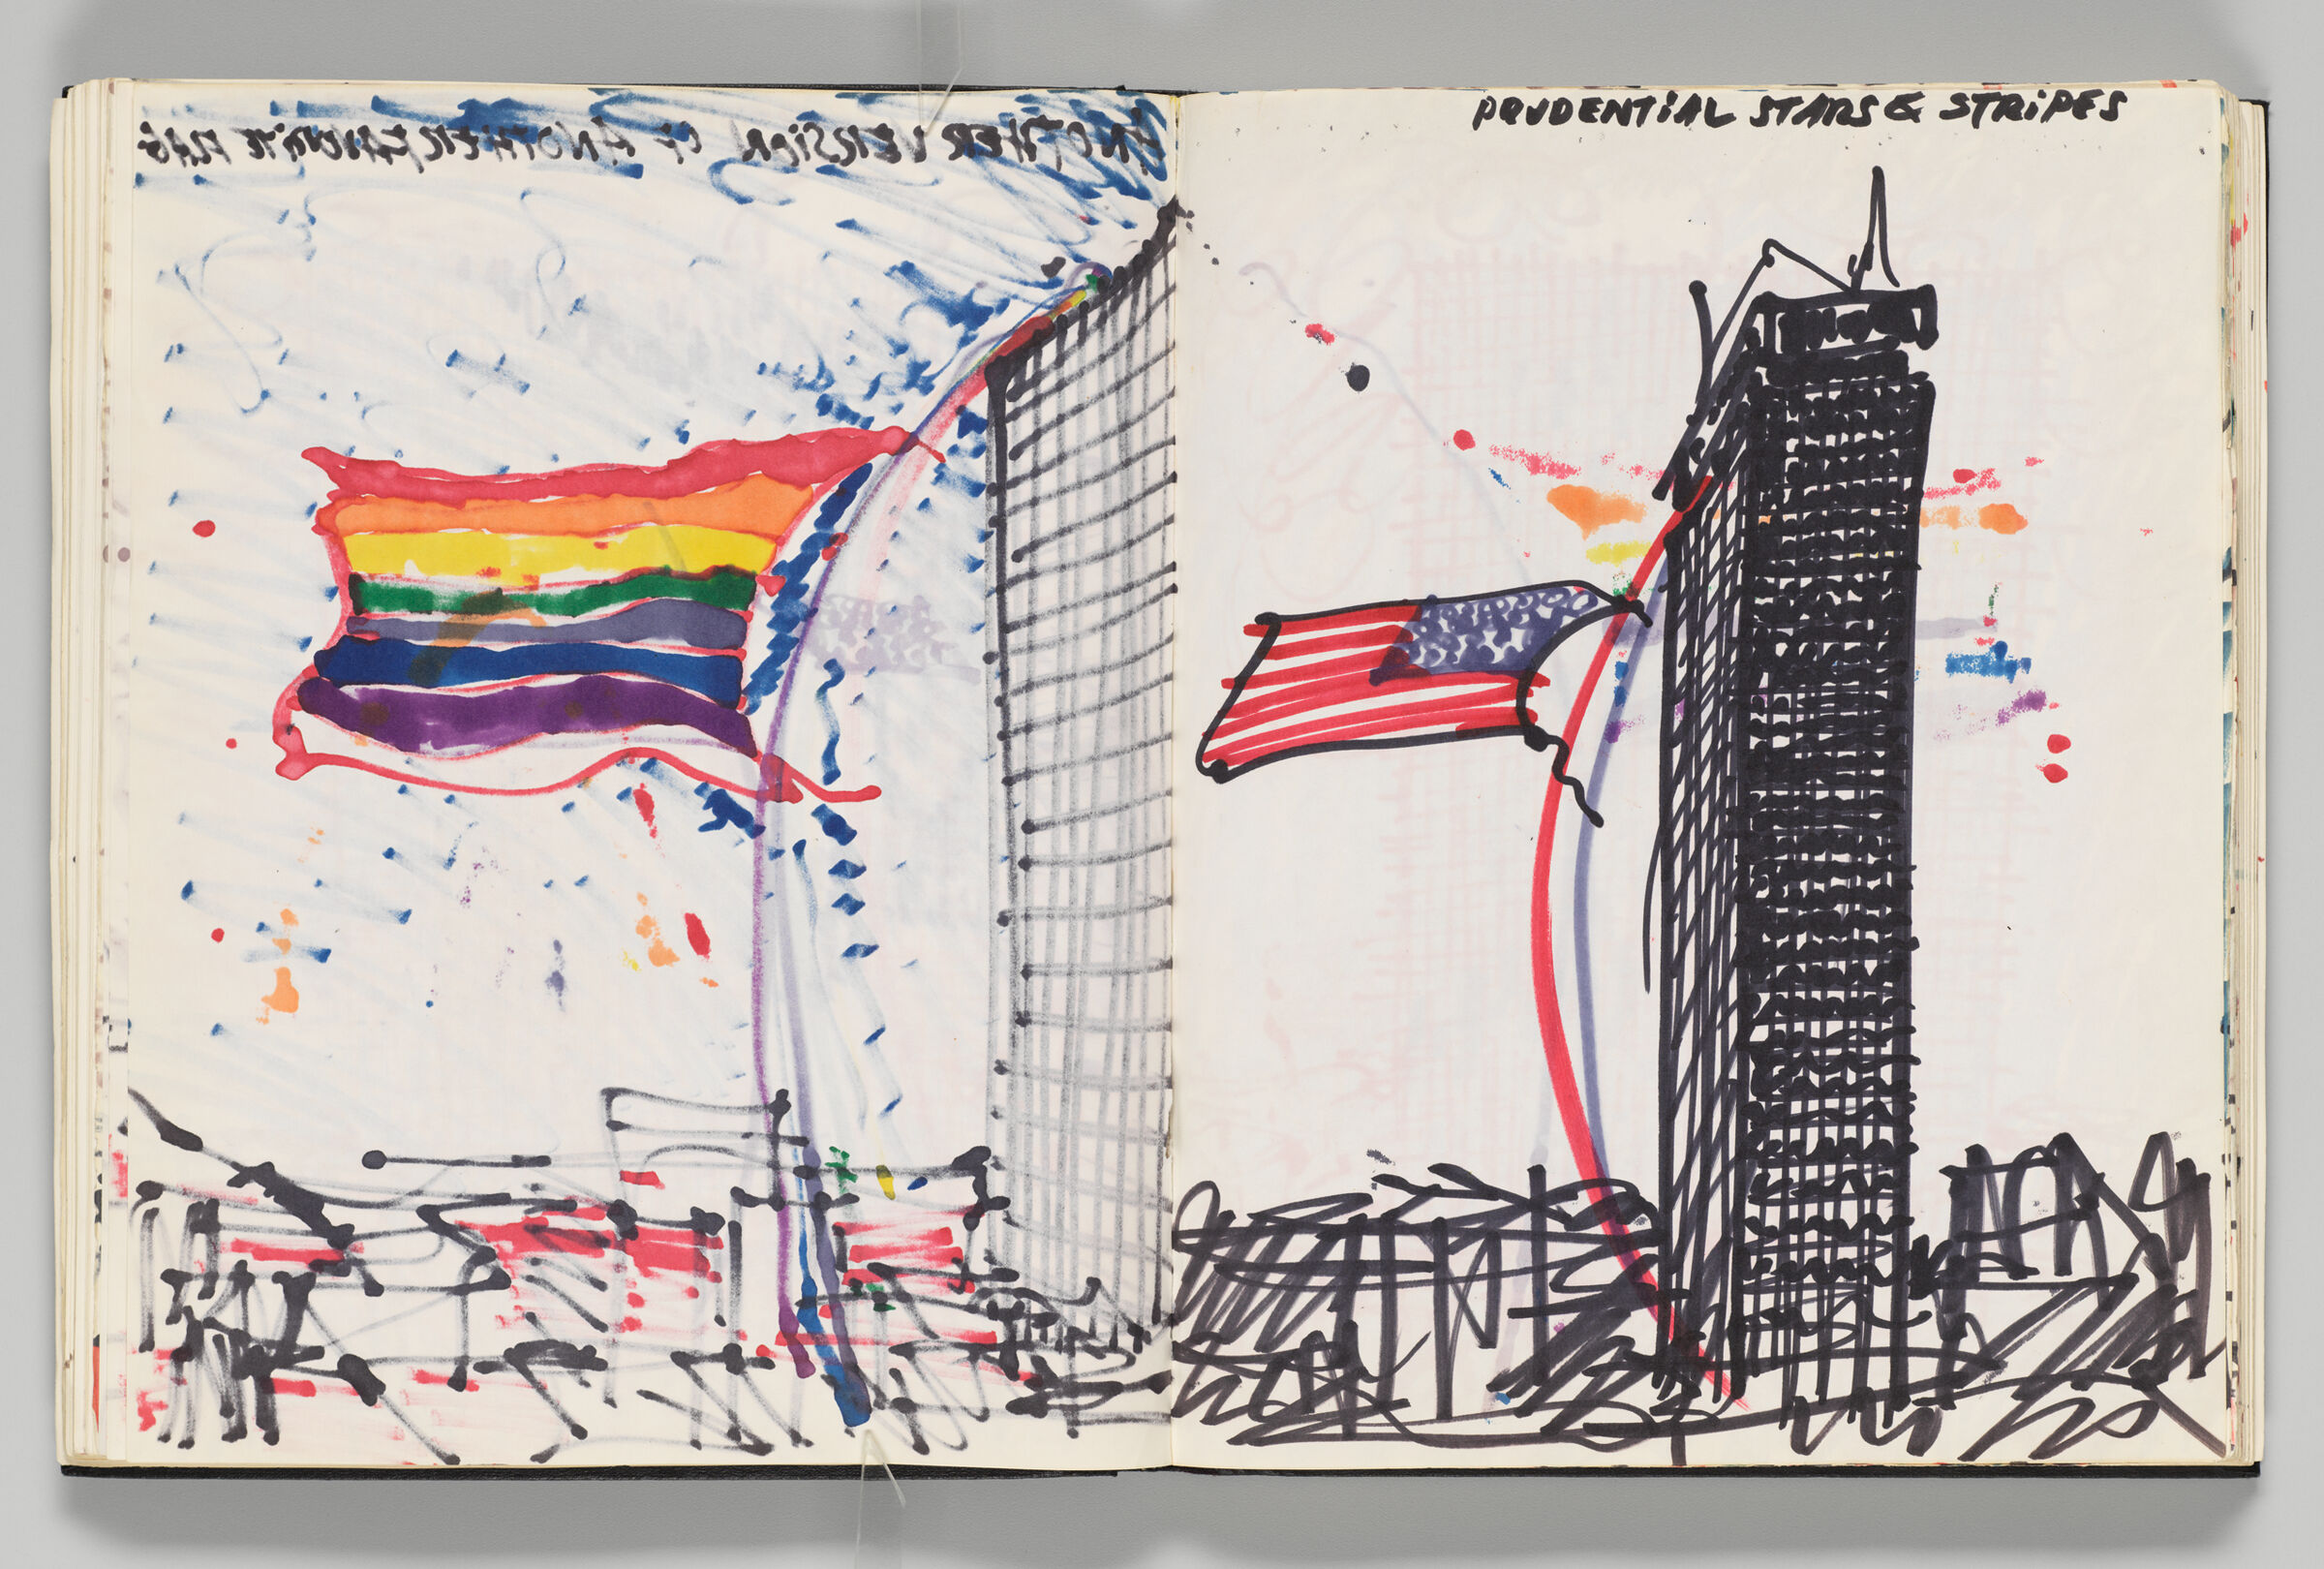 Untitled (Bleed-Through Of Previous Page With Color Transfer, Left Page); Untitled (Design For Prudential Building With 